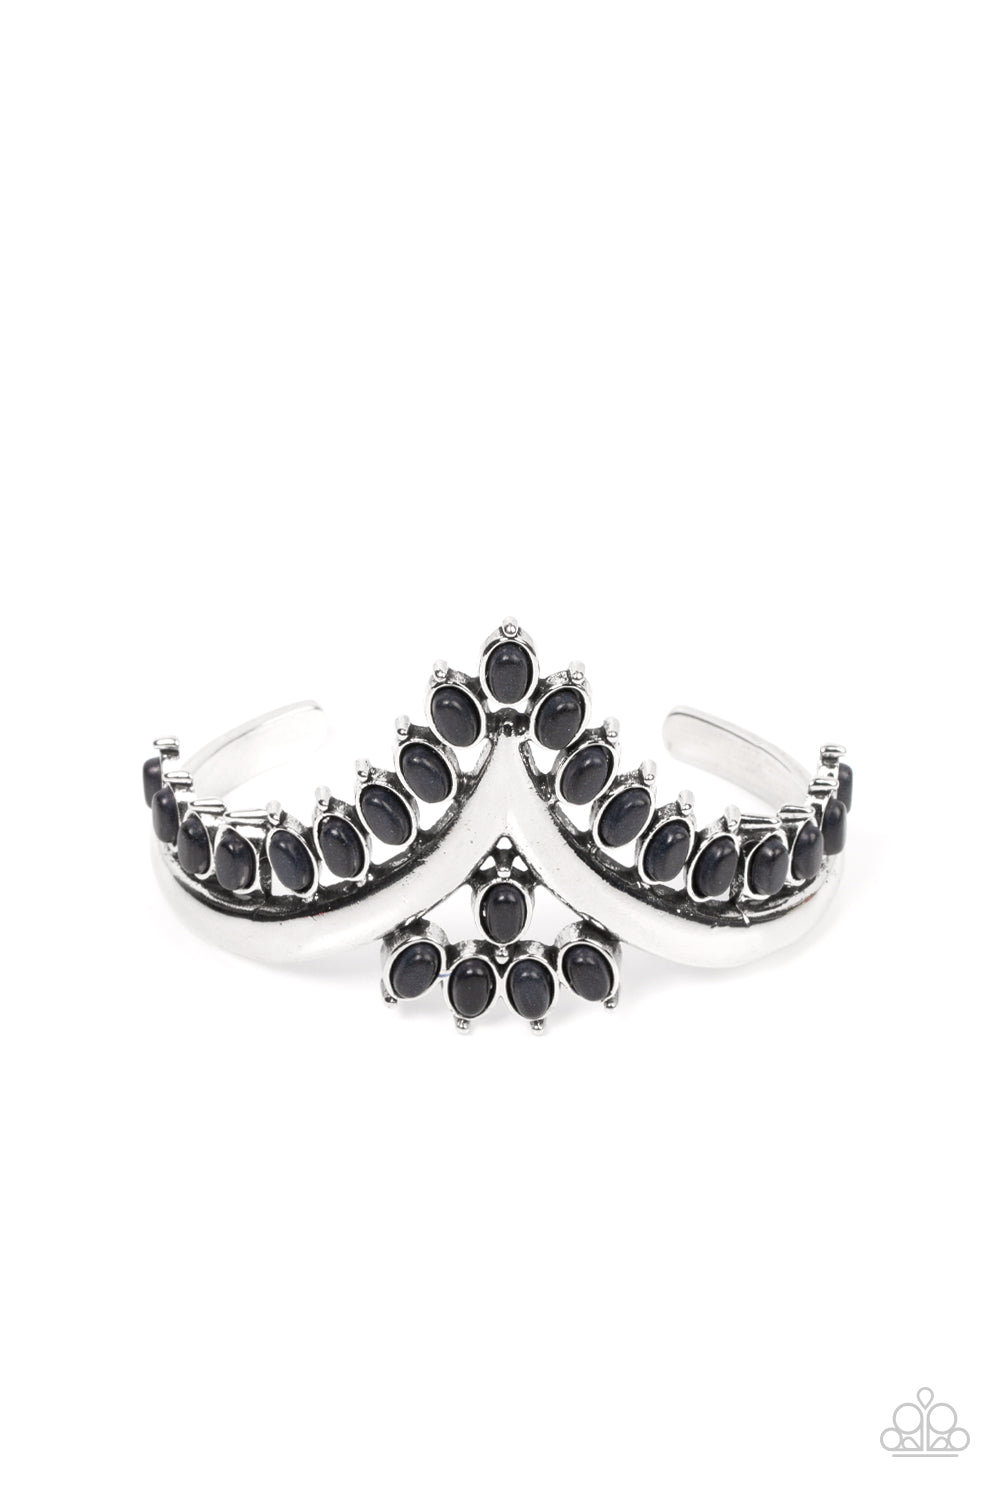 Paparazzi Accessories Teton Tiara - Black Stone Convention Bracelet black oval stones, encased in studded silver frames, line the edge of a daring V-shaped silver cuff. A gathering of black stones adorns the center of the bracelet, adding a finishing touch to the rustically regal cuff.  Sold as one individual bracelet.  2022 Glow Convention 